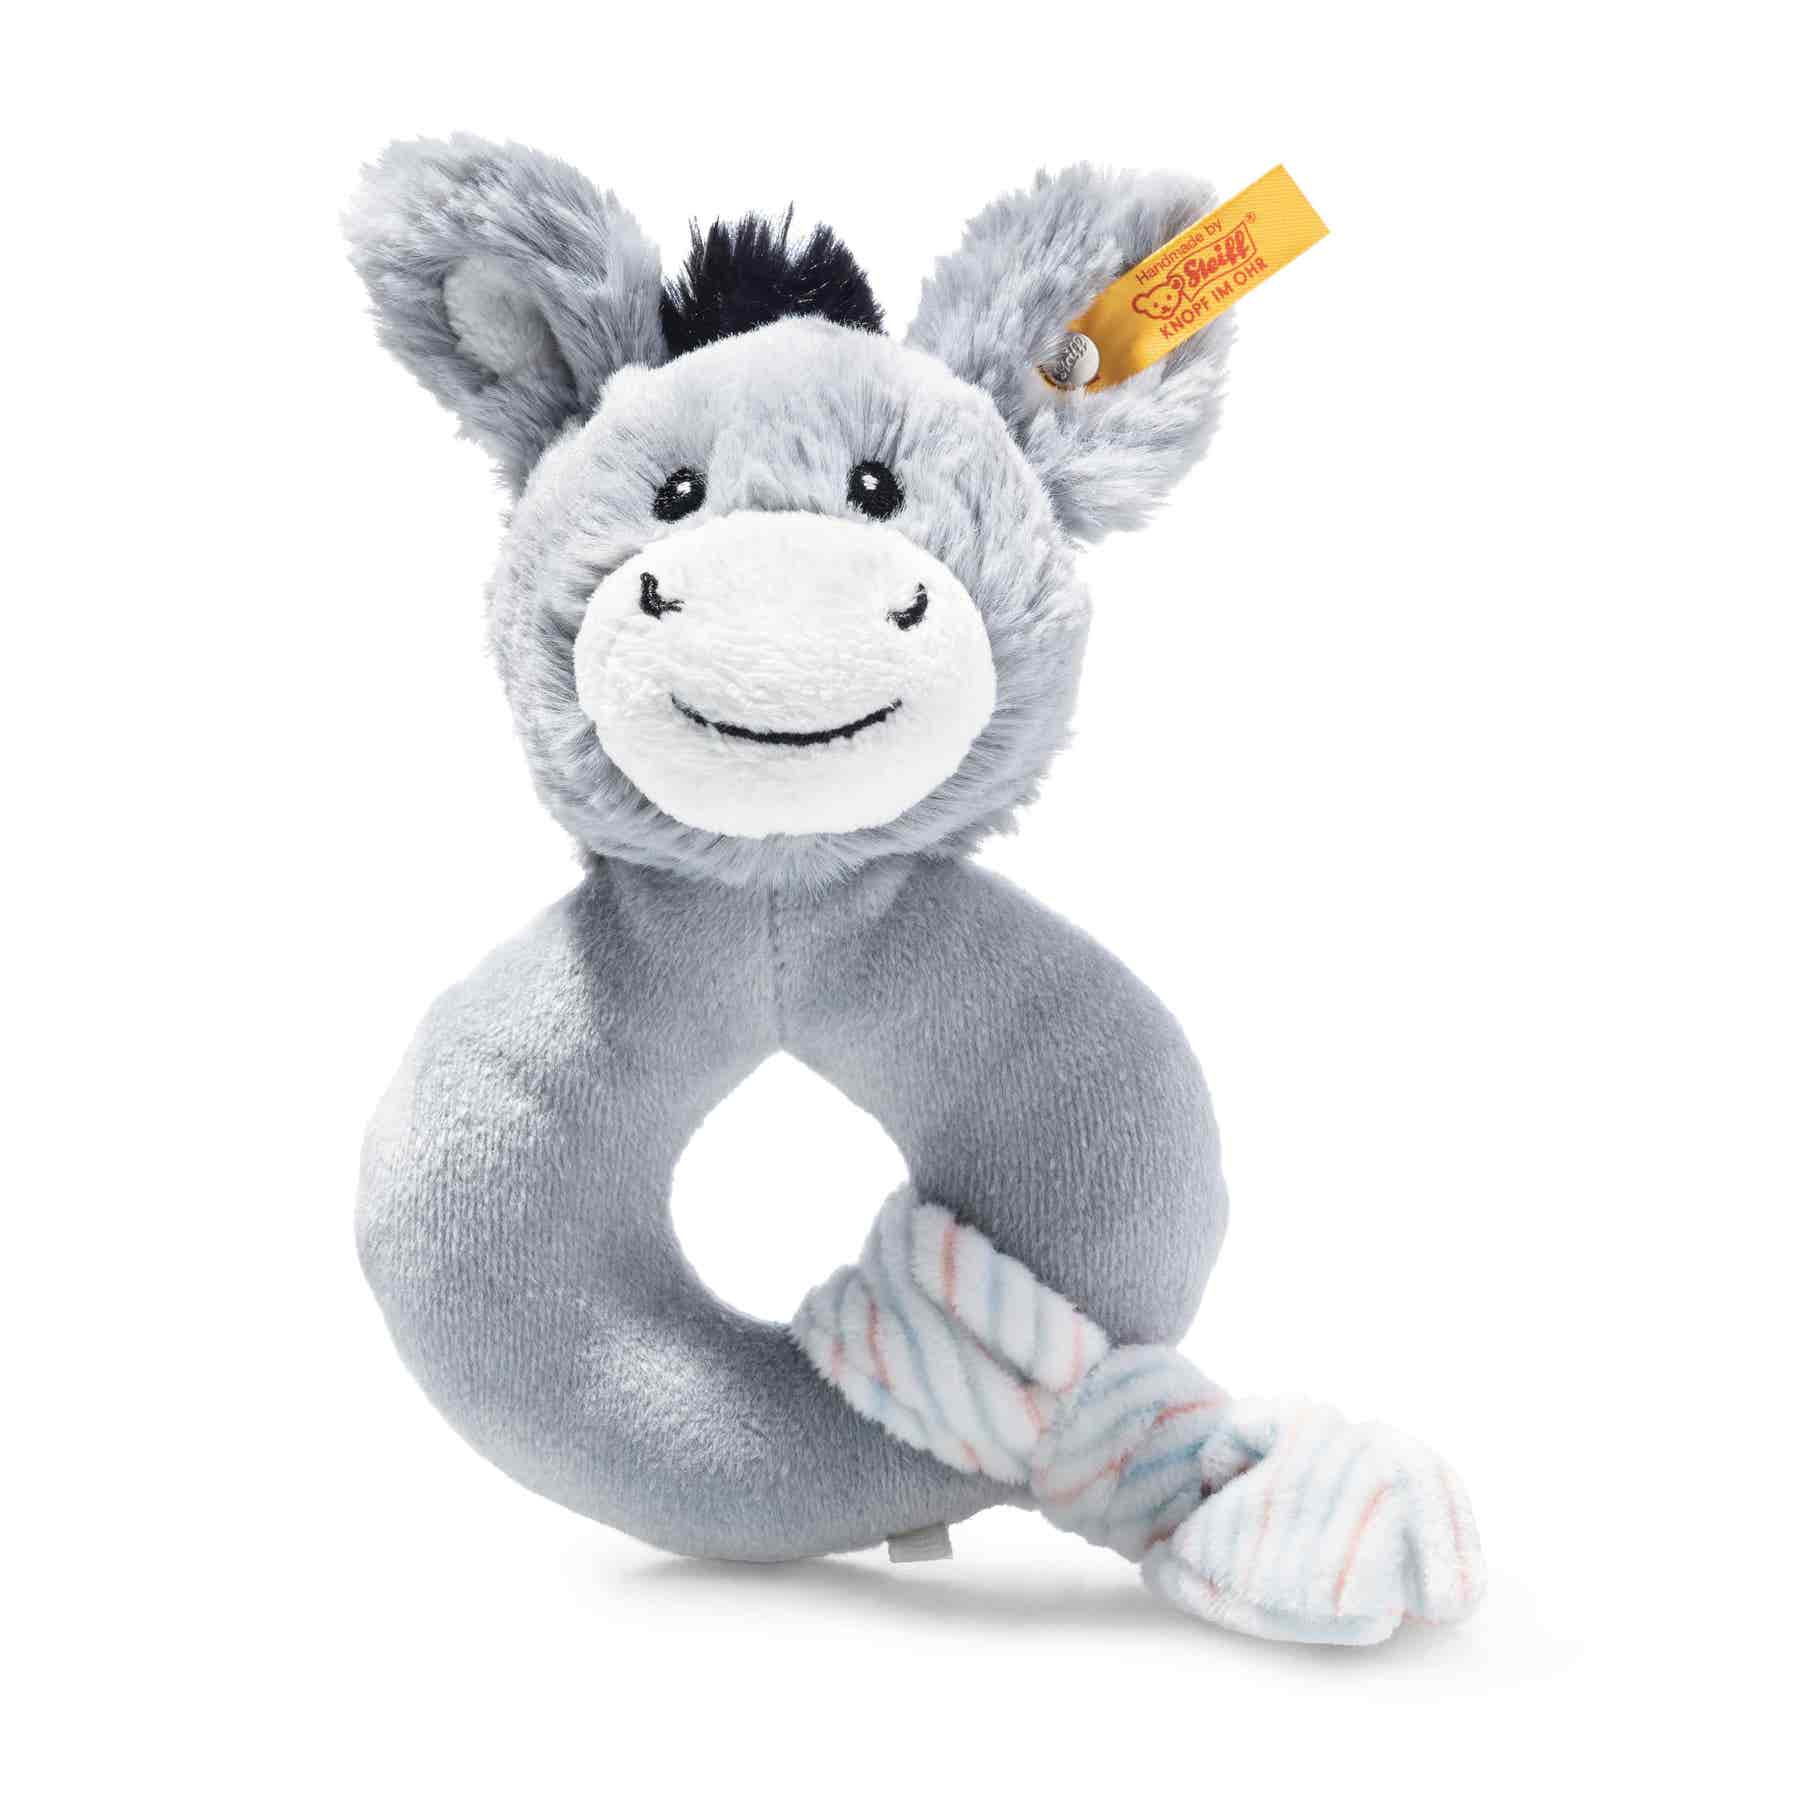 Soft grey ring rattle grip toy with donkey head by Steiff